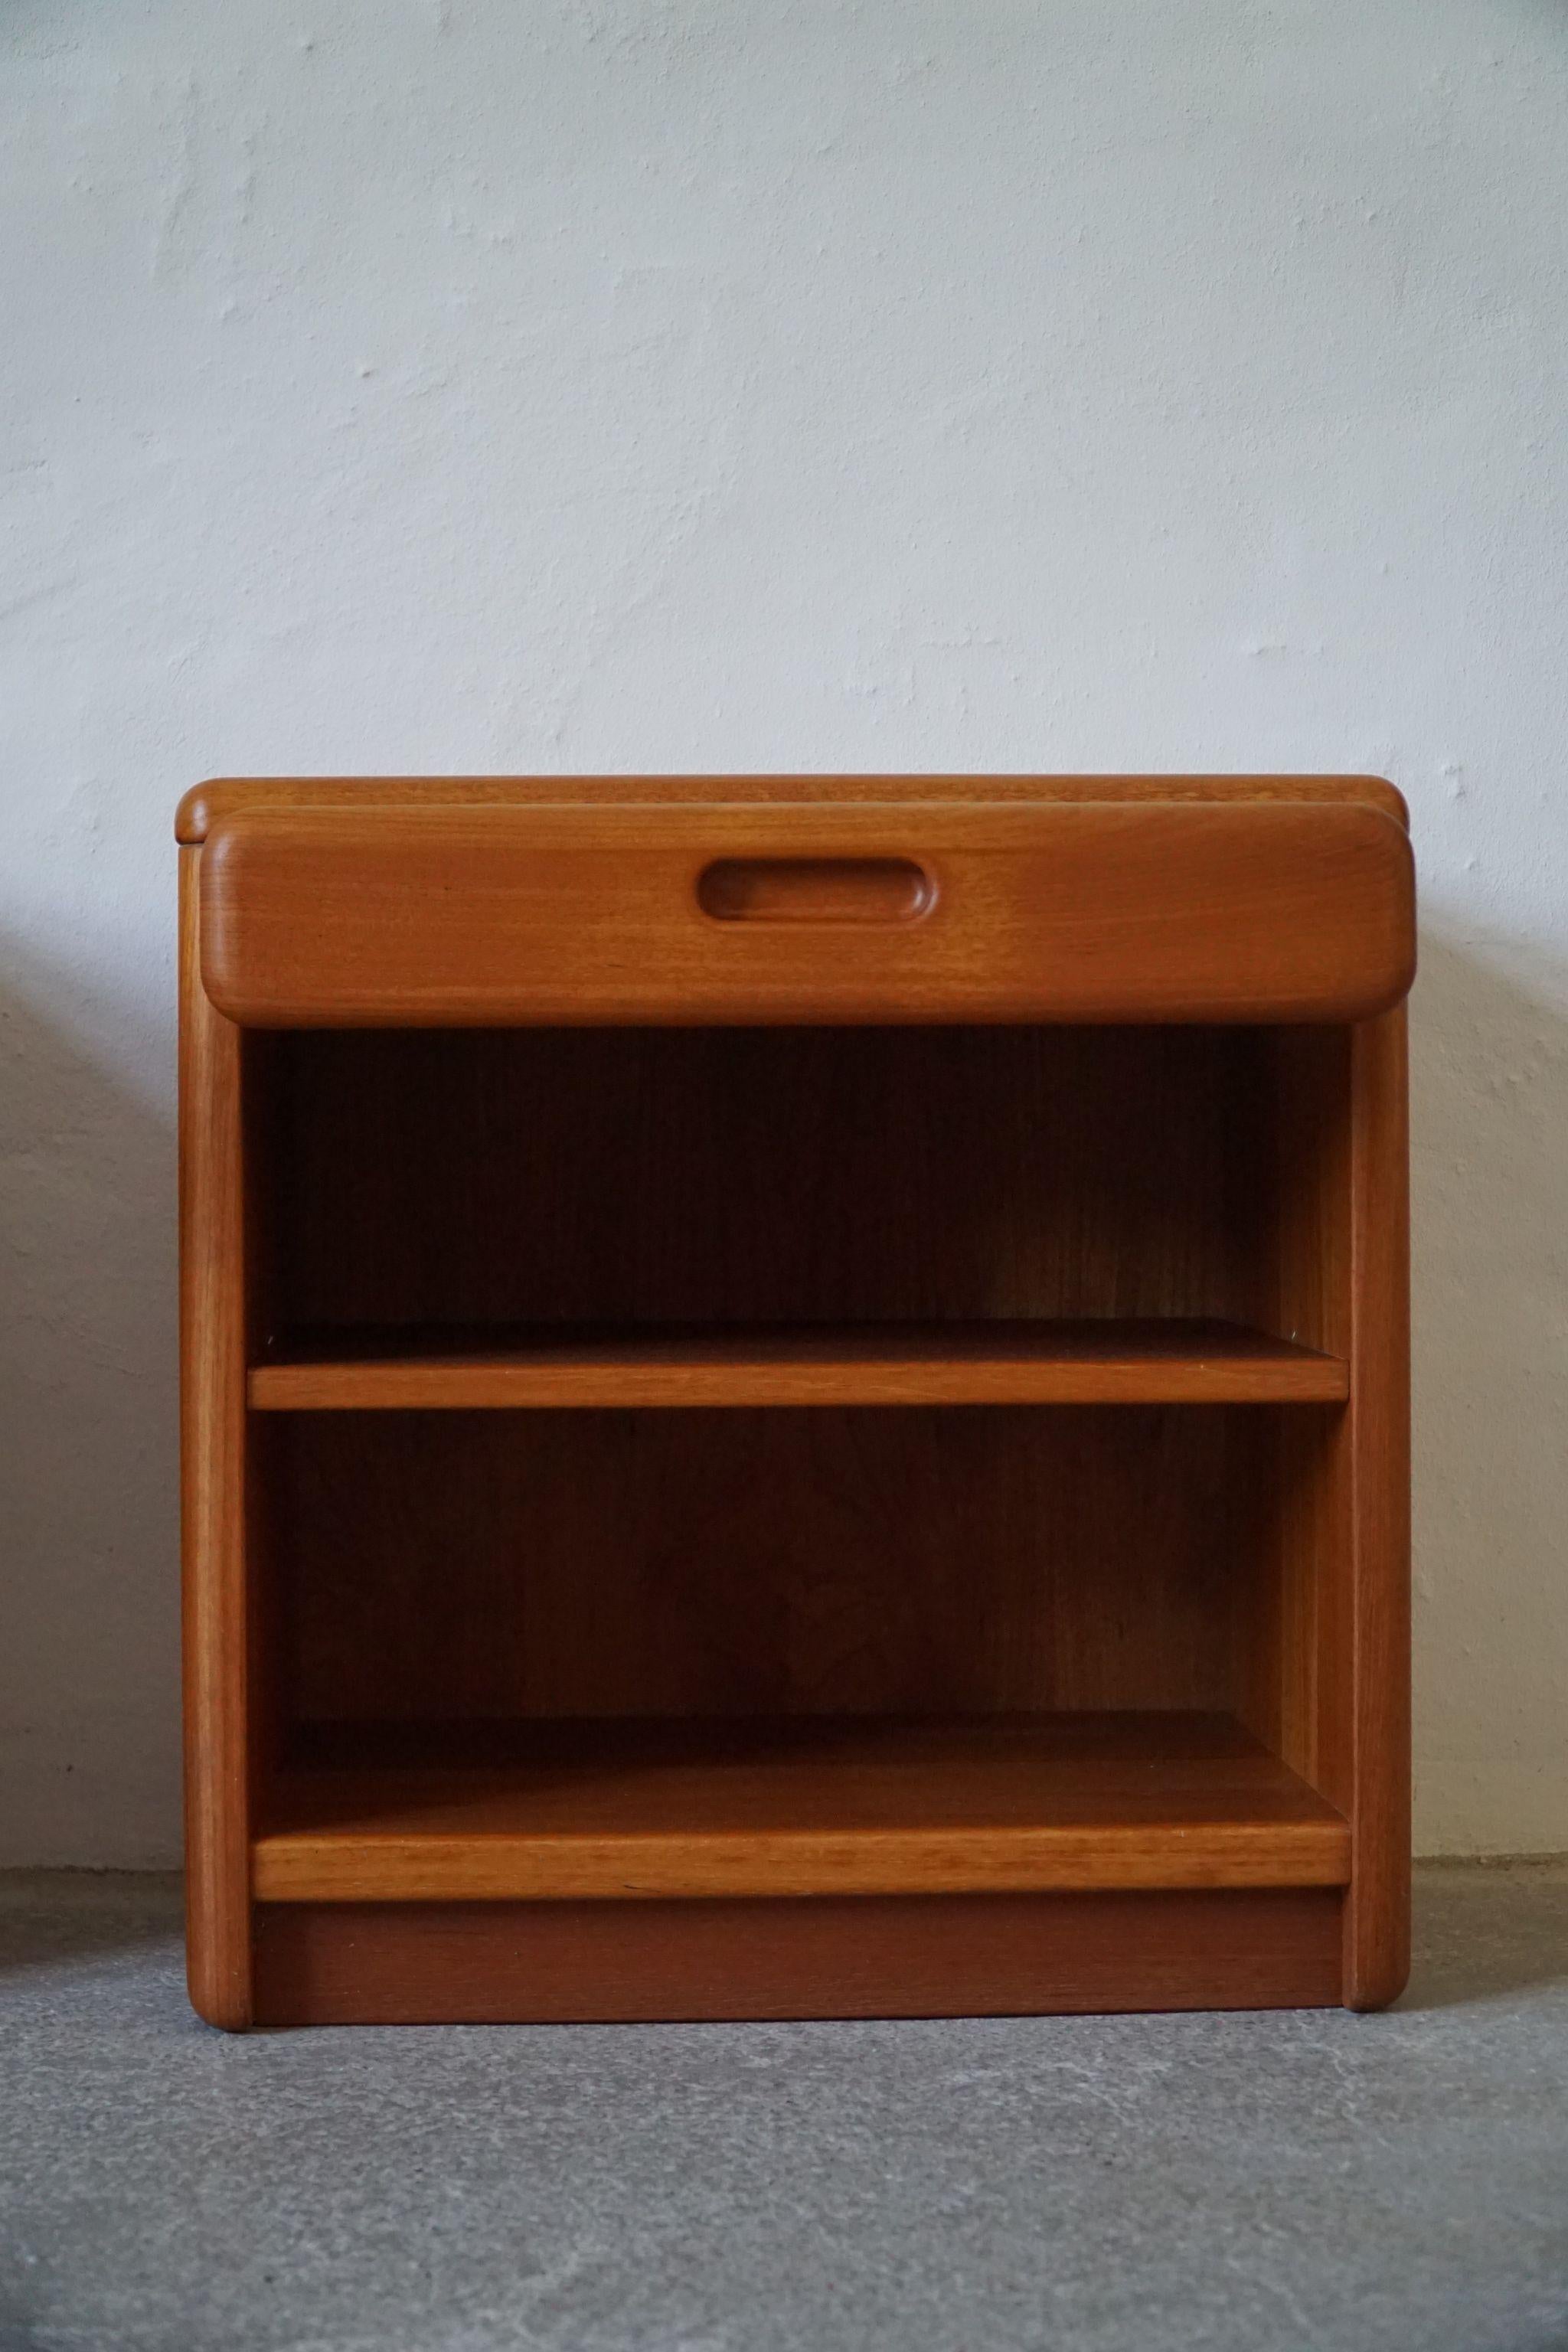 20th Century 1960s, Pair of Night Stands with Drawers in Solid Teak, Danish Mid-Century